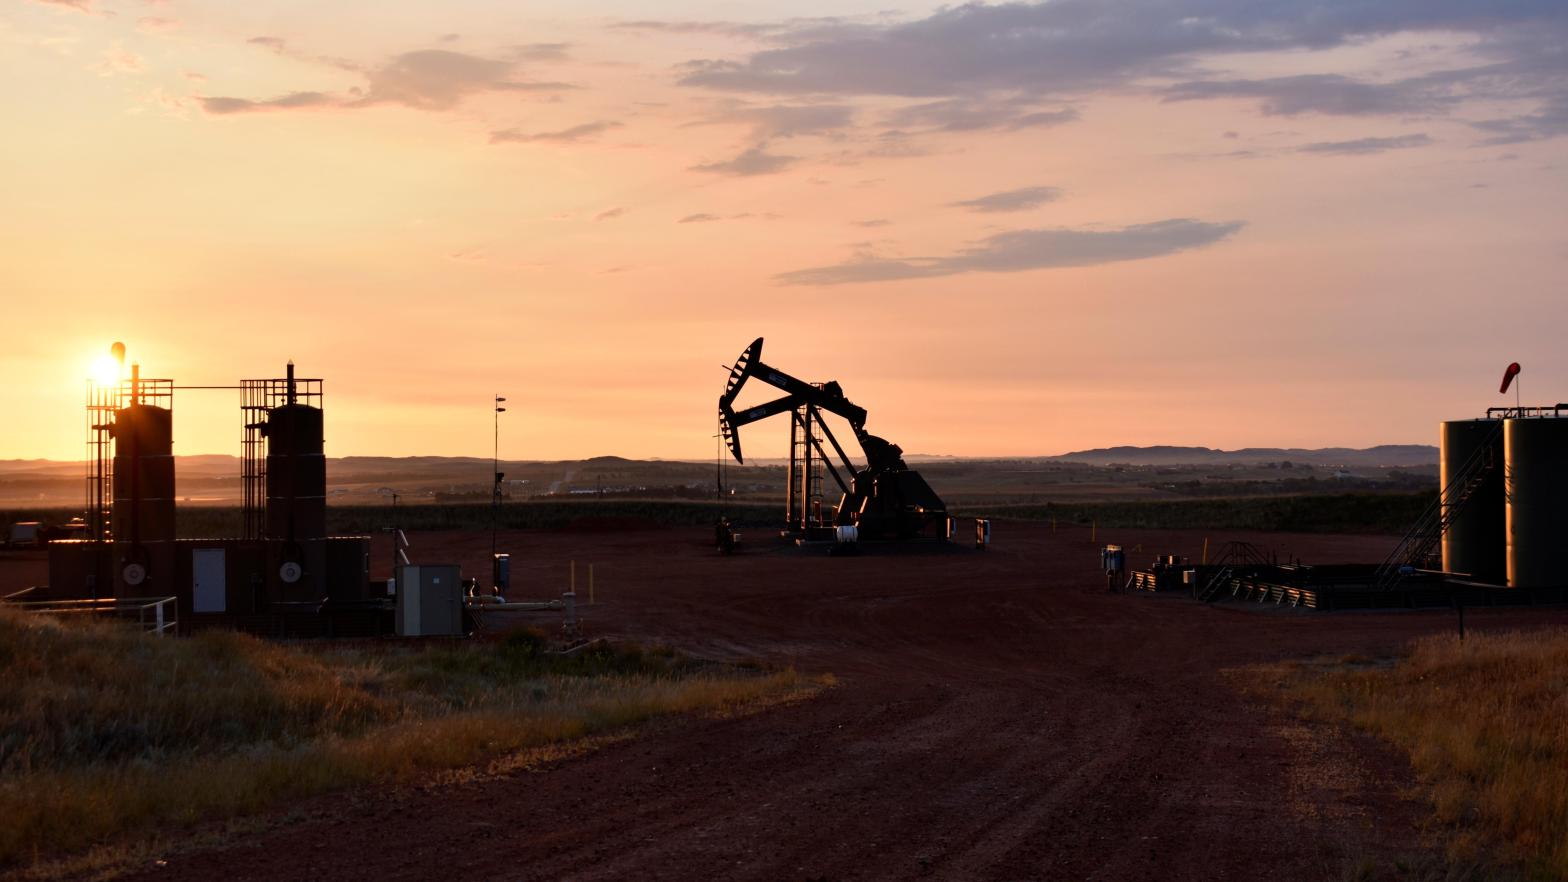 An oil well works at sunrise Aug. 25, 2021, in Watford City, N.D., part of McKenzie County. (Photo: Matthew Brown, AP)